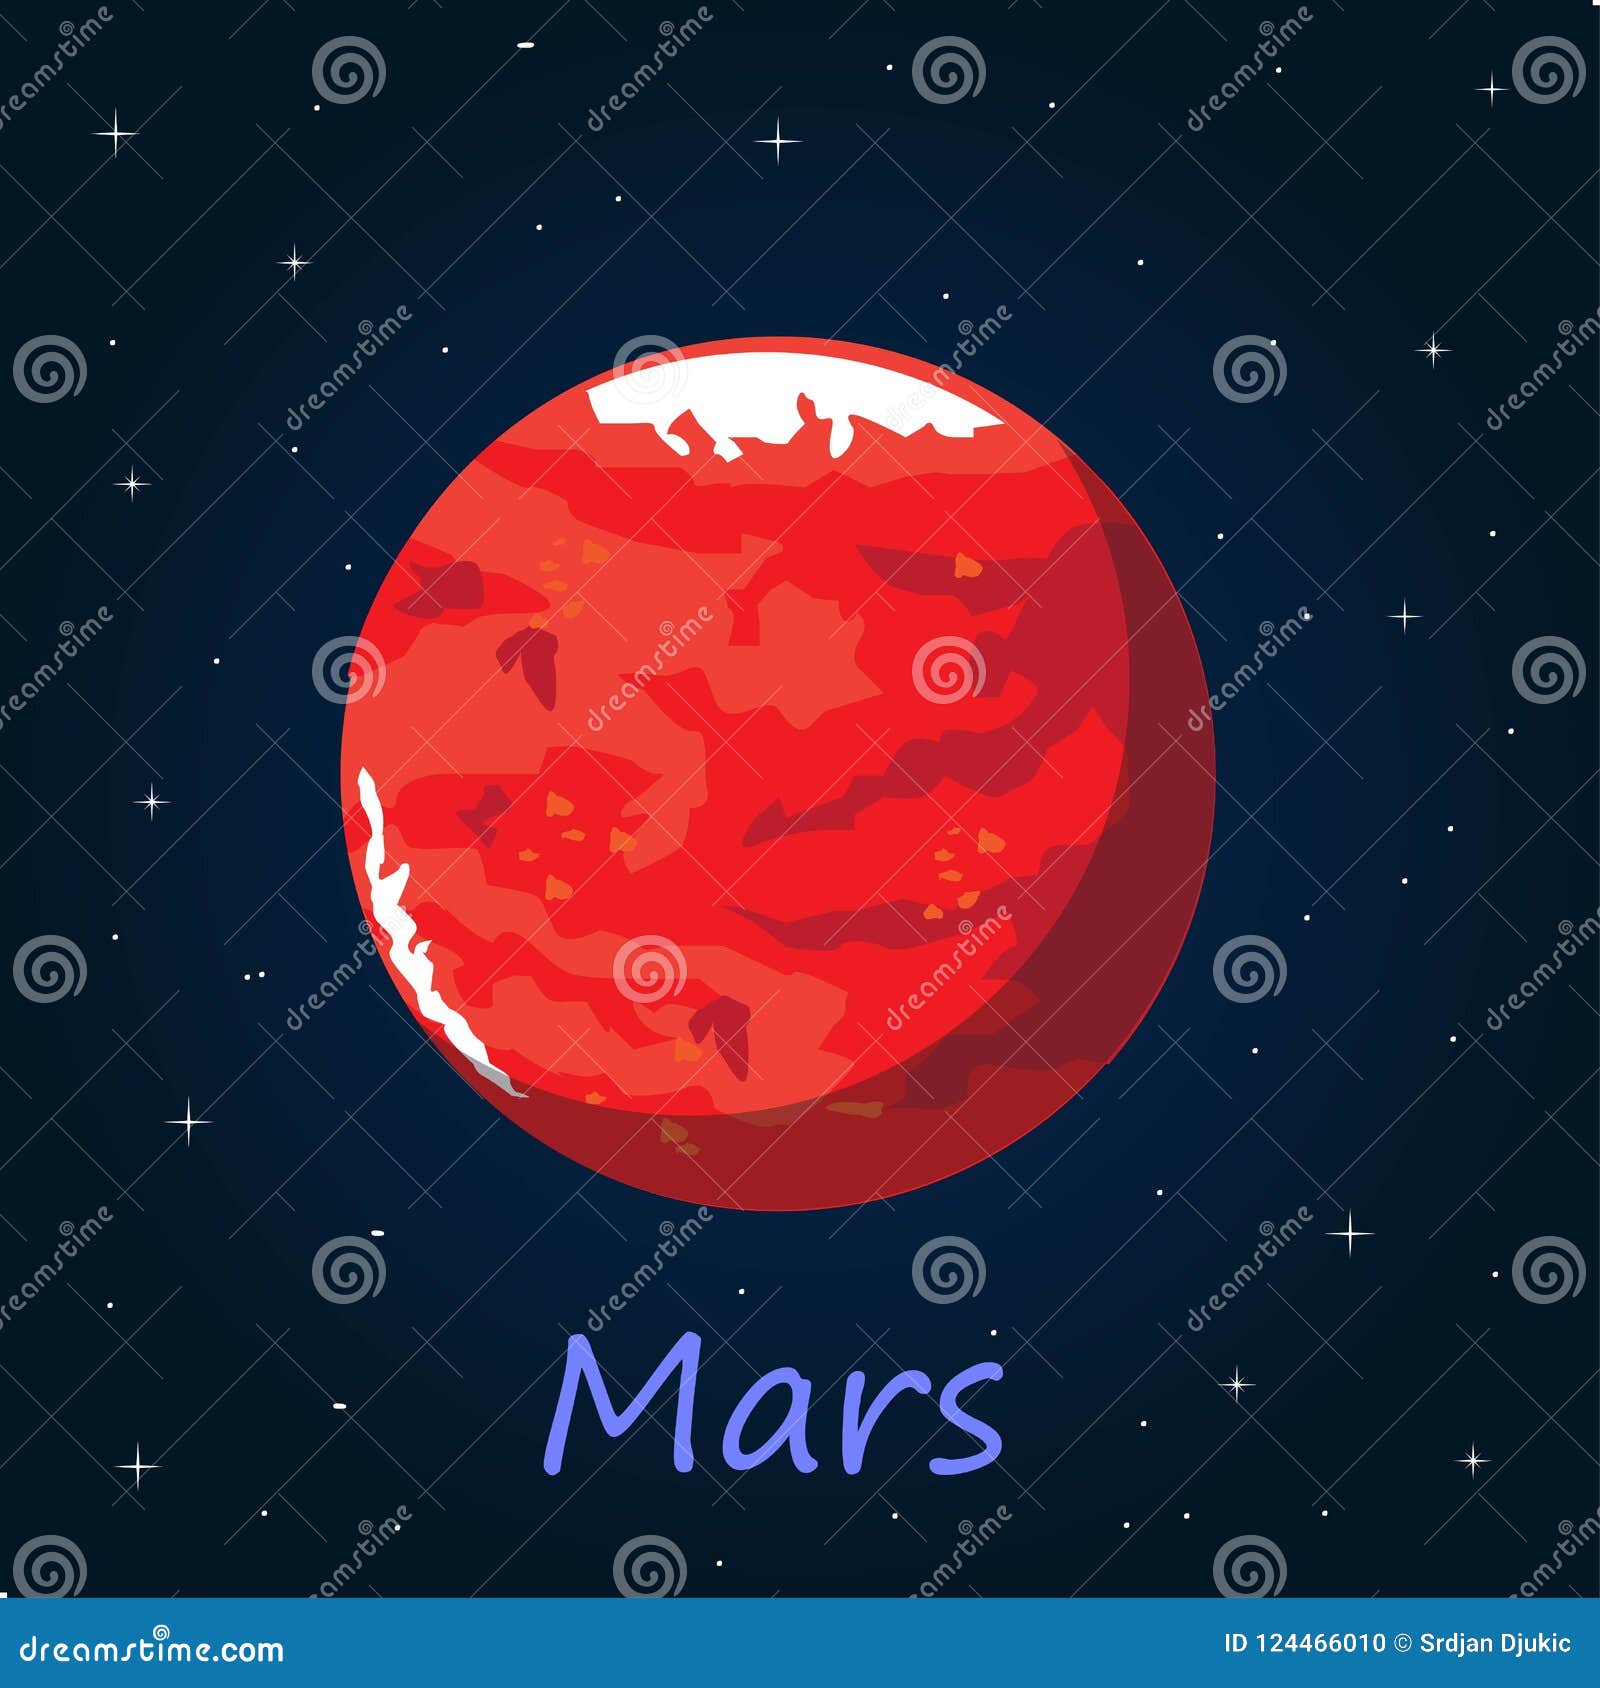 Mars Is The Fourth Planet From The Sun And The Second